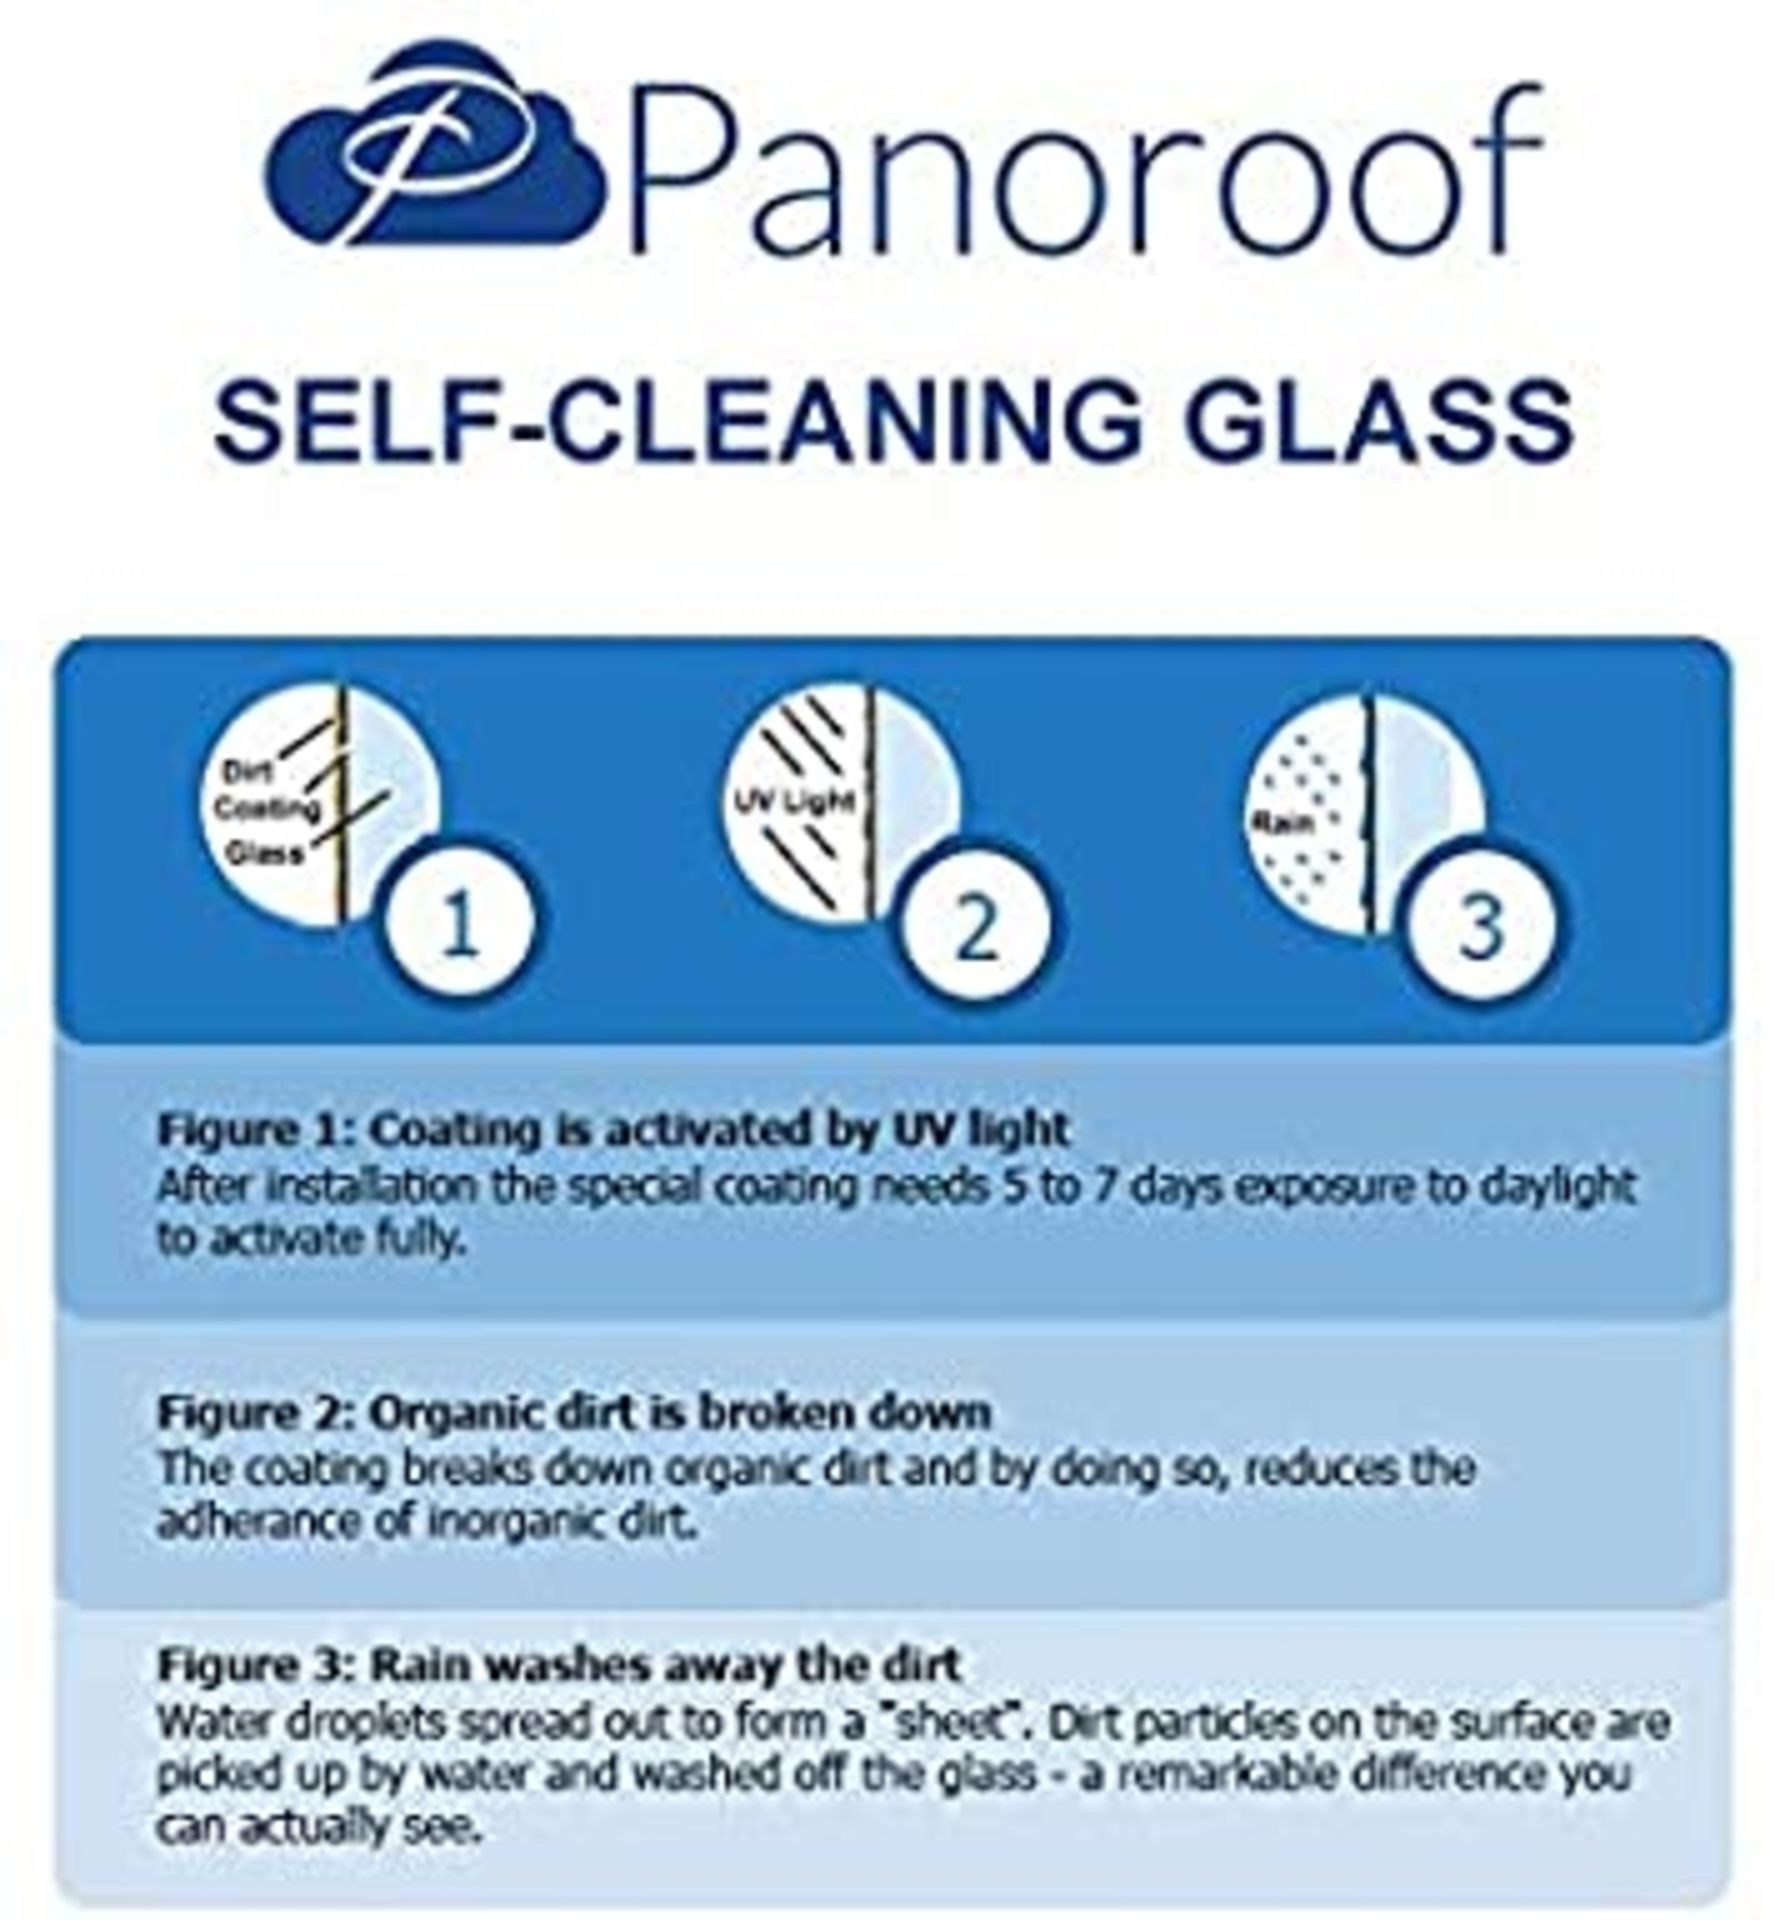 """Panoroof Triple Glazed Self Cleaning 800x800mm (inside Size Visable glass area) Seamless Glass - Image 6 of 6